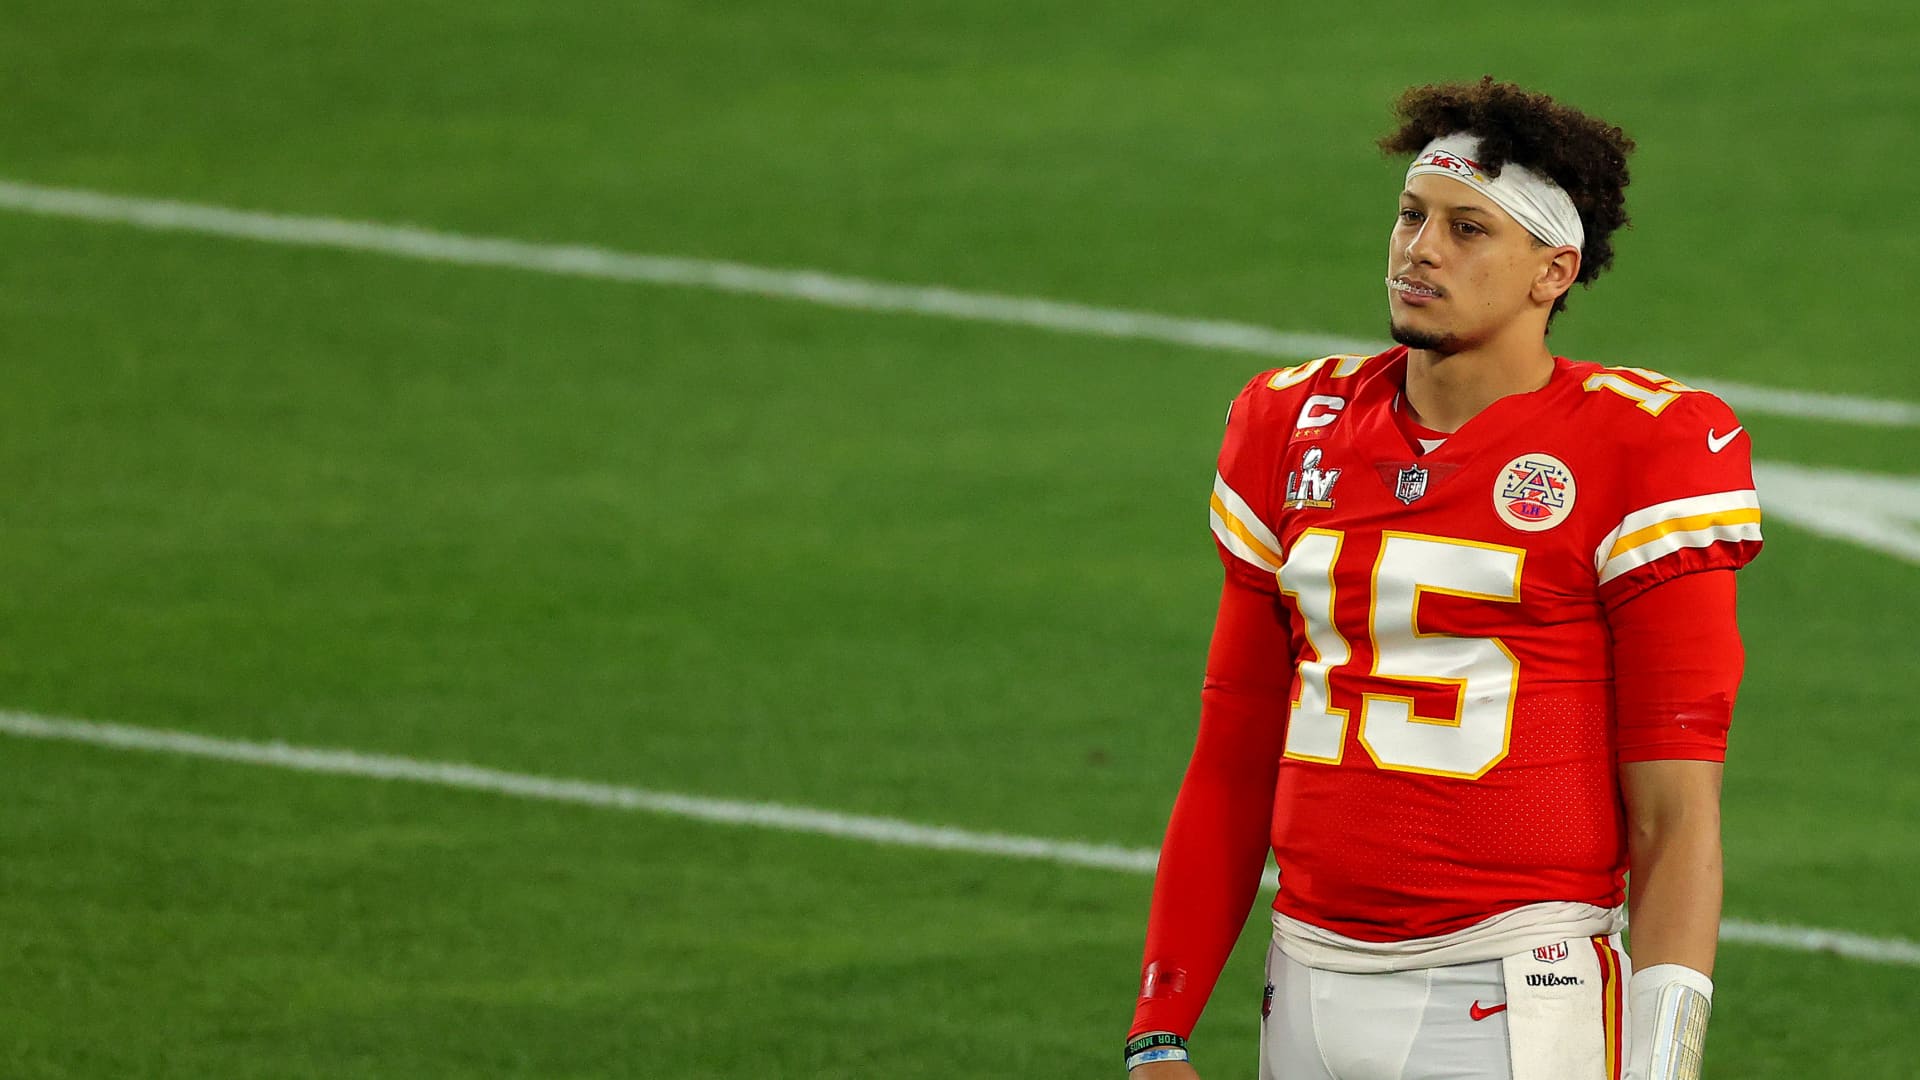 Patrick Mahomes #15 of the Kansas City Chiefs looks on before Super Bowl LV against the Tampa Bay Buccaneers at Raymond James Stadium on February 07, 2021 in Tampa, Florida.